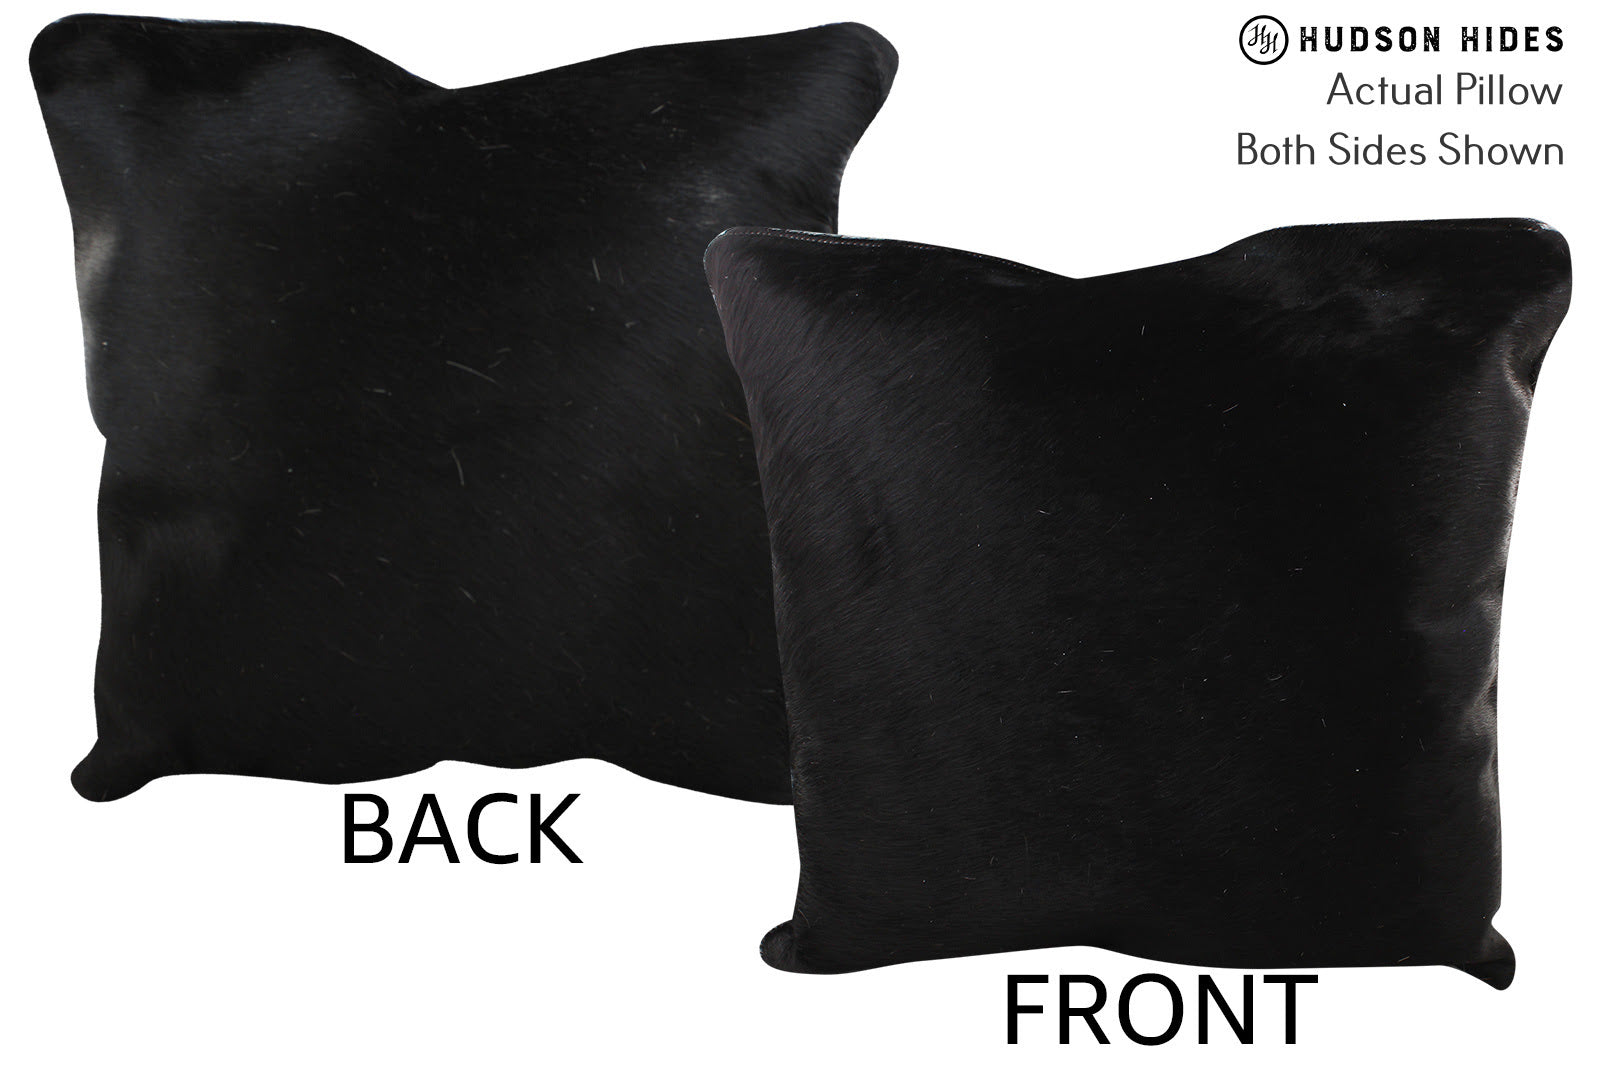 Solid Black Cowhide Pillow #76239